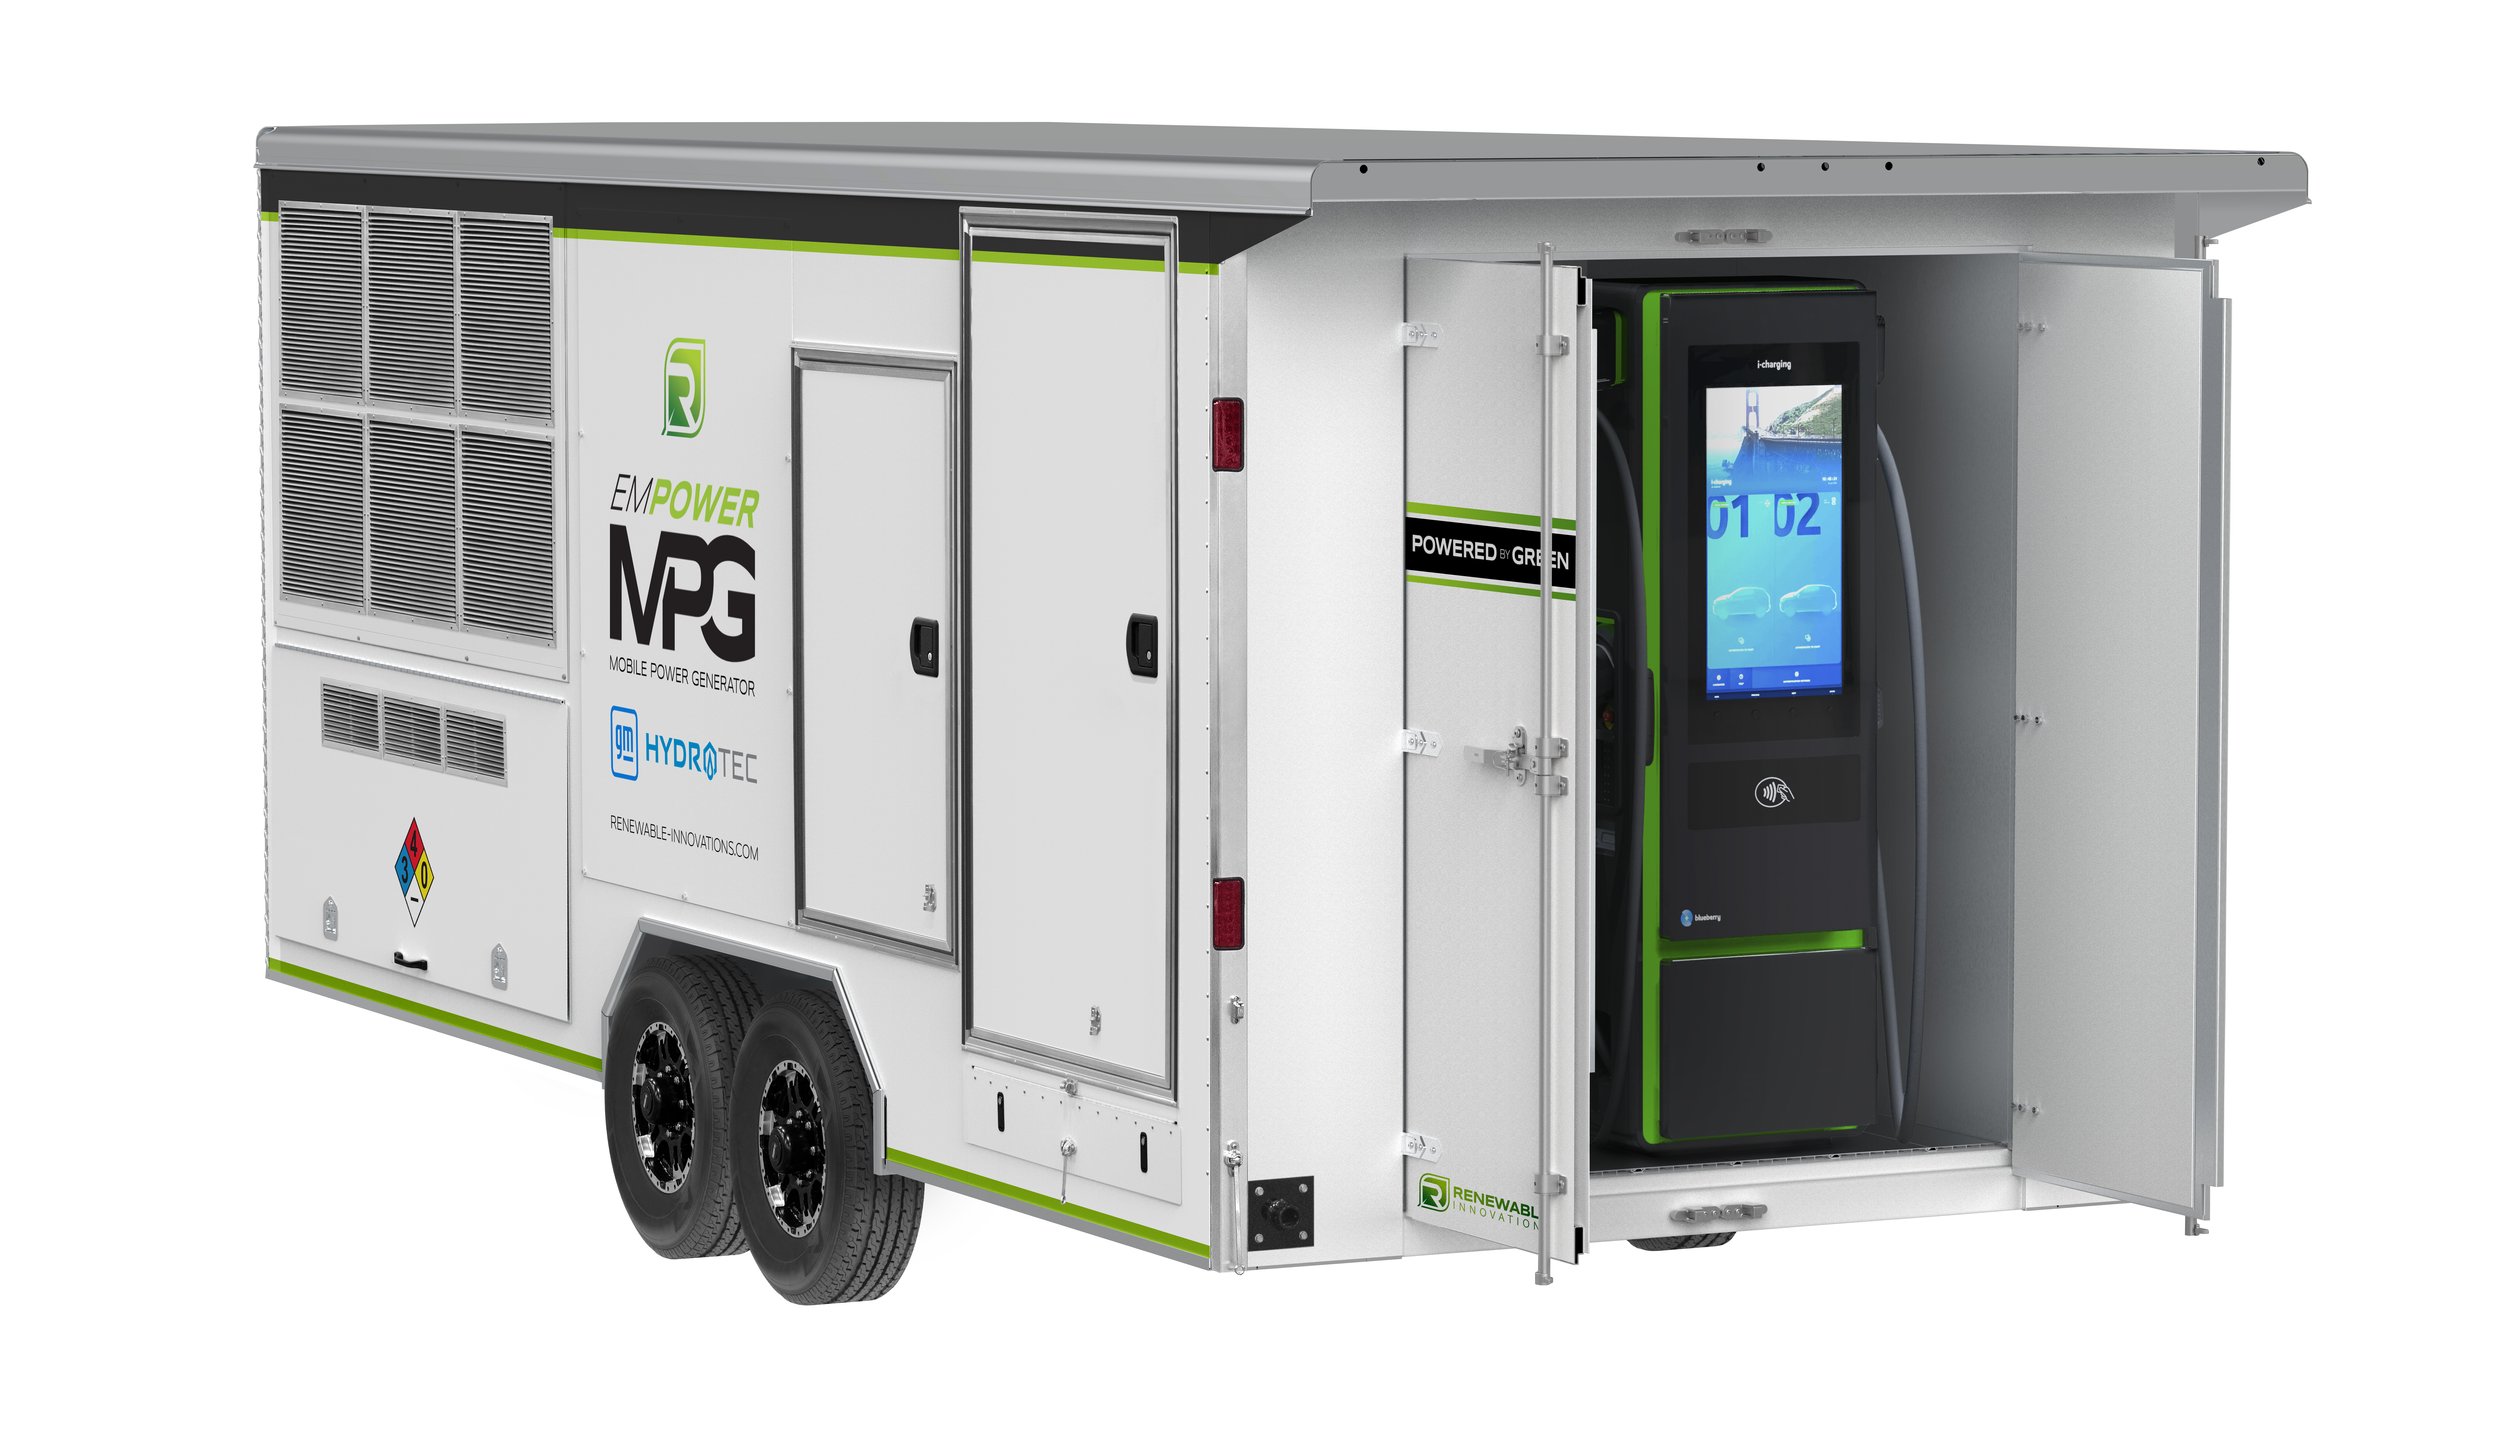 Hydrogen Mobile Power Generator (MPG) shown with back doors open and visible EV Rapid Charger inside.